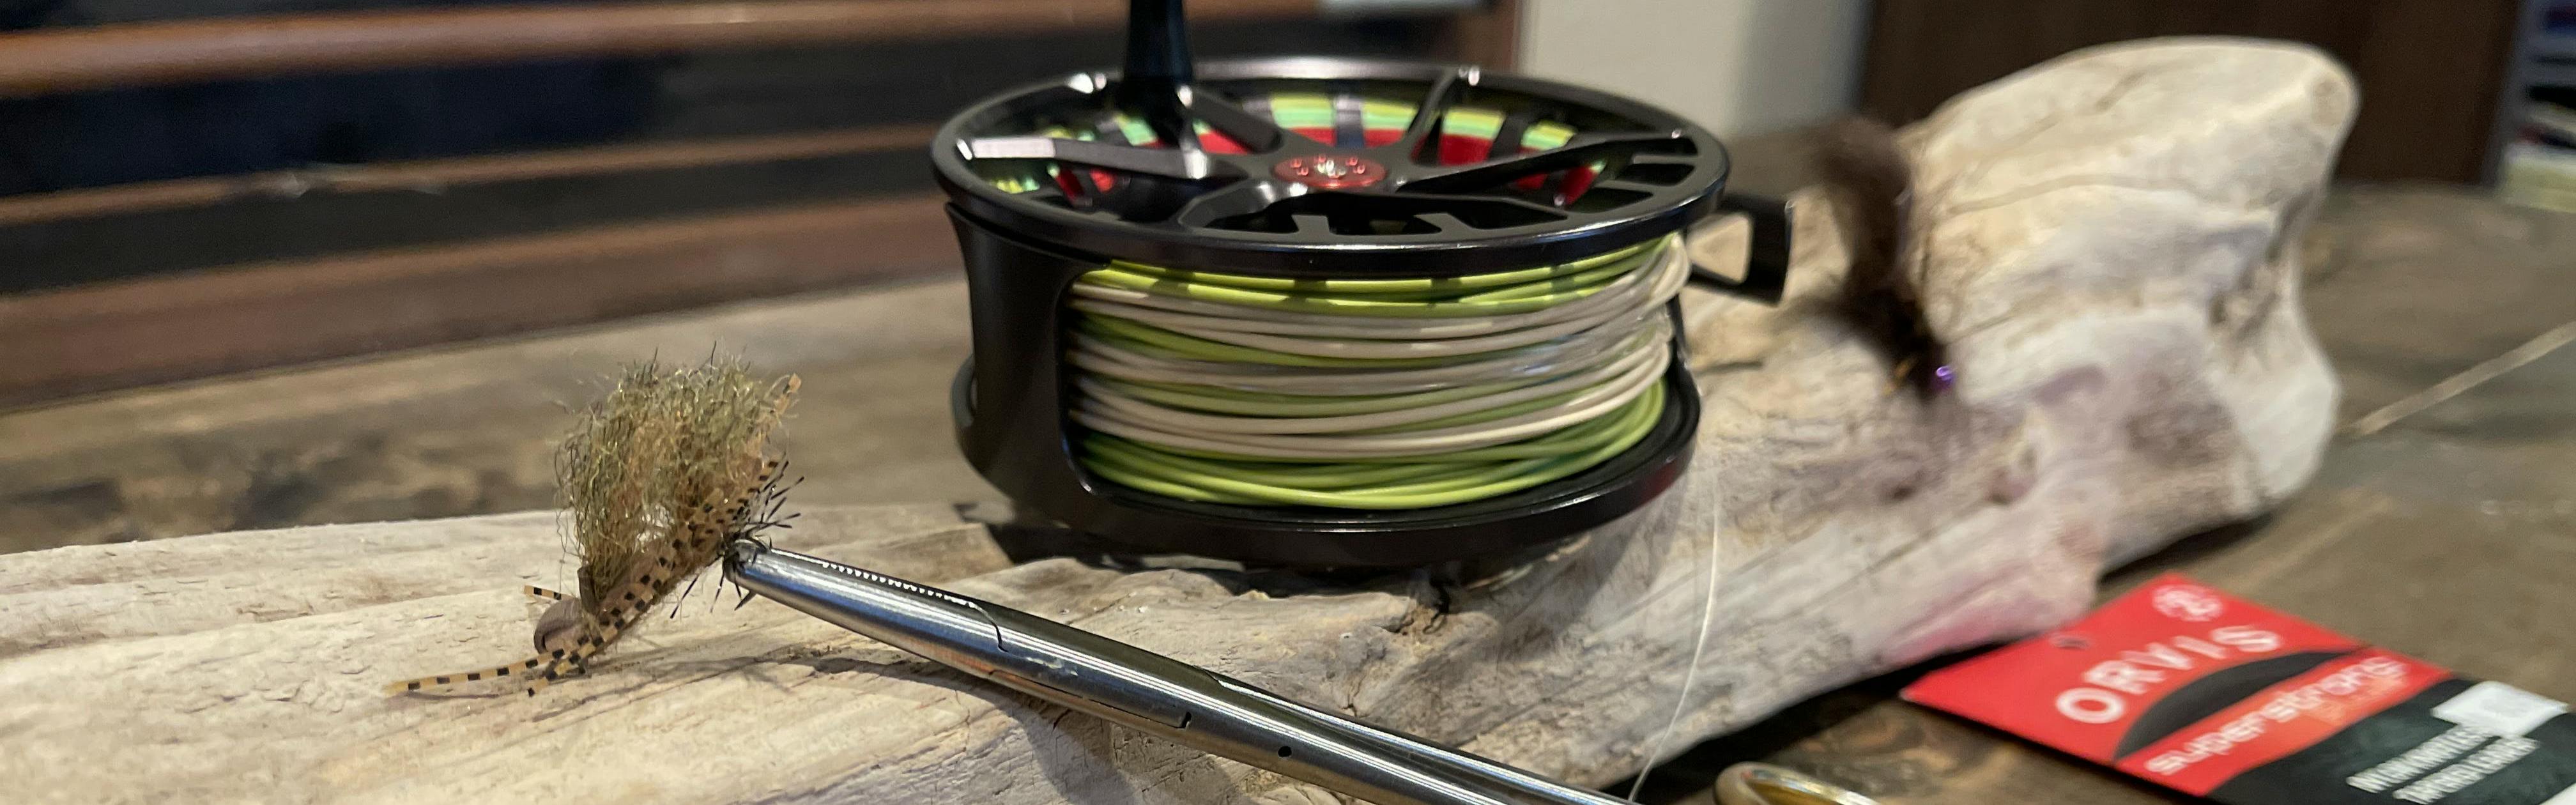 Gear Review: ROSS ANIMAS REEL - Flylords Mag